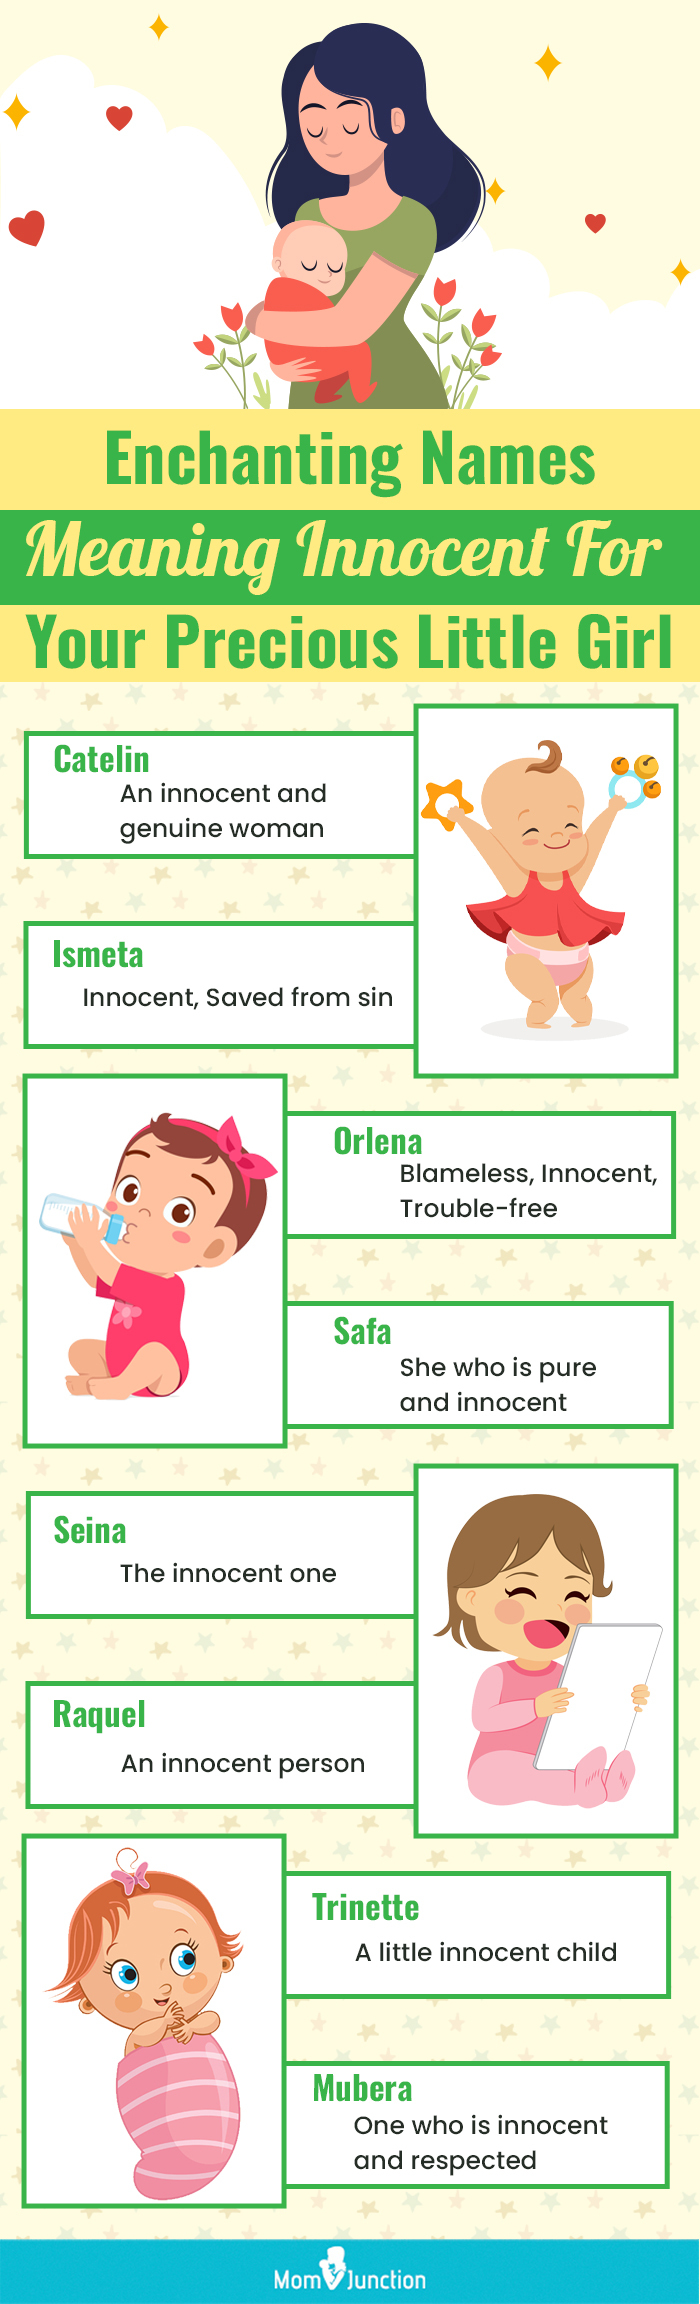 enchanting names meaning innocent for your precious little girl (infographic)